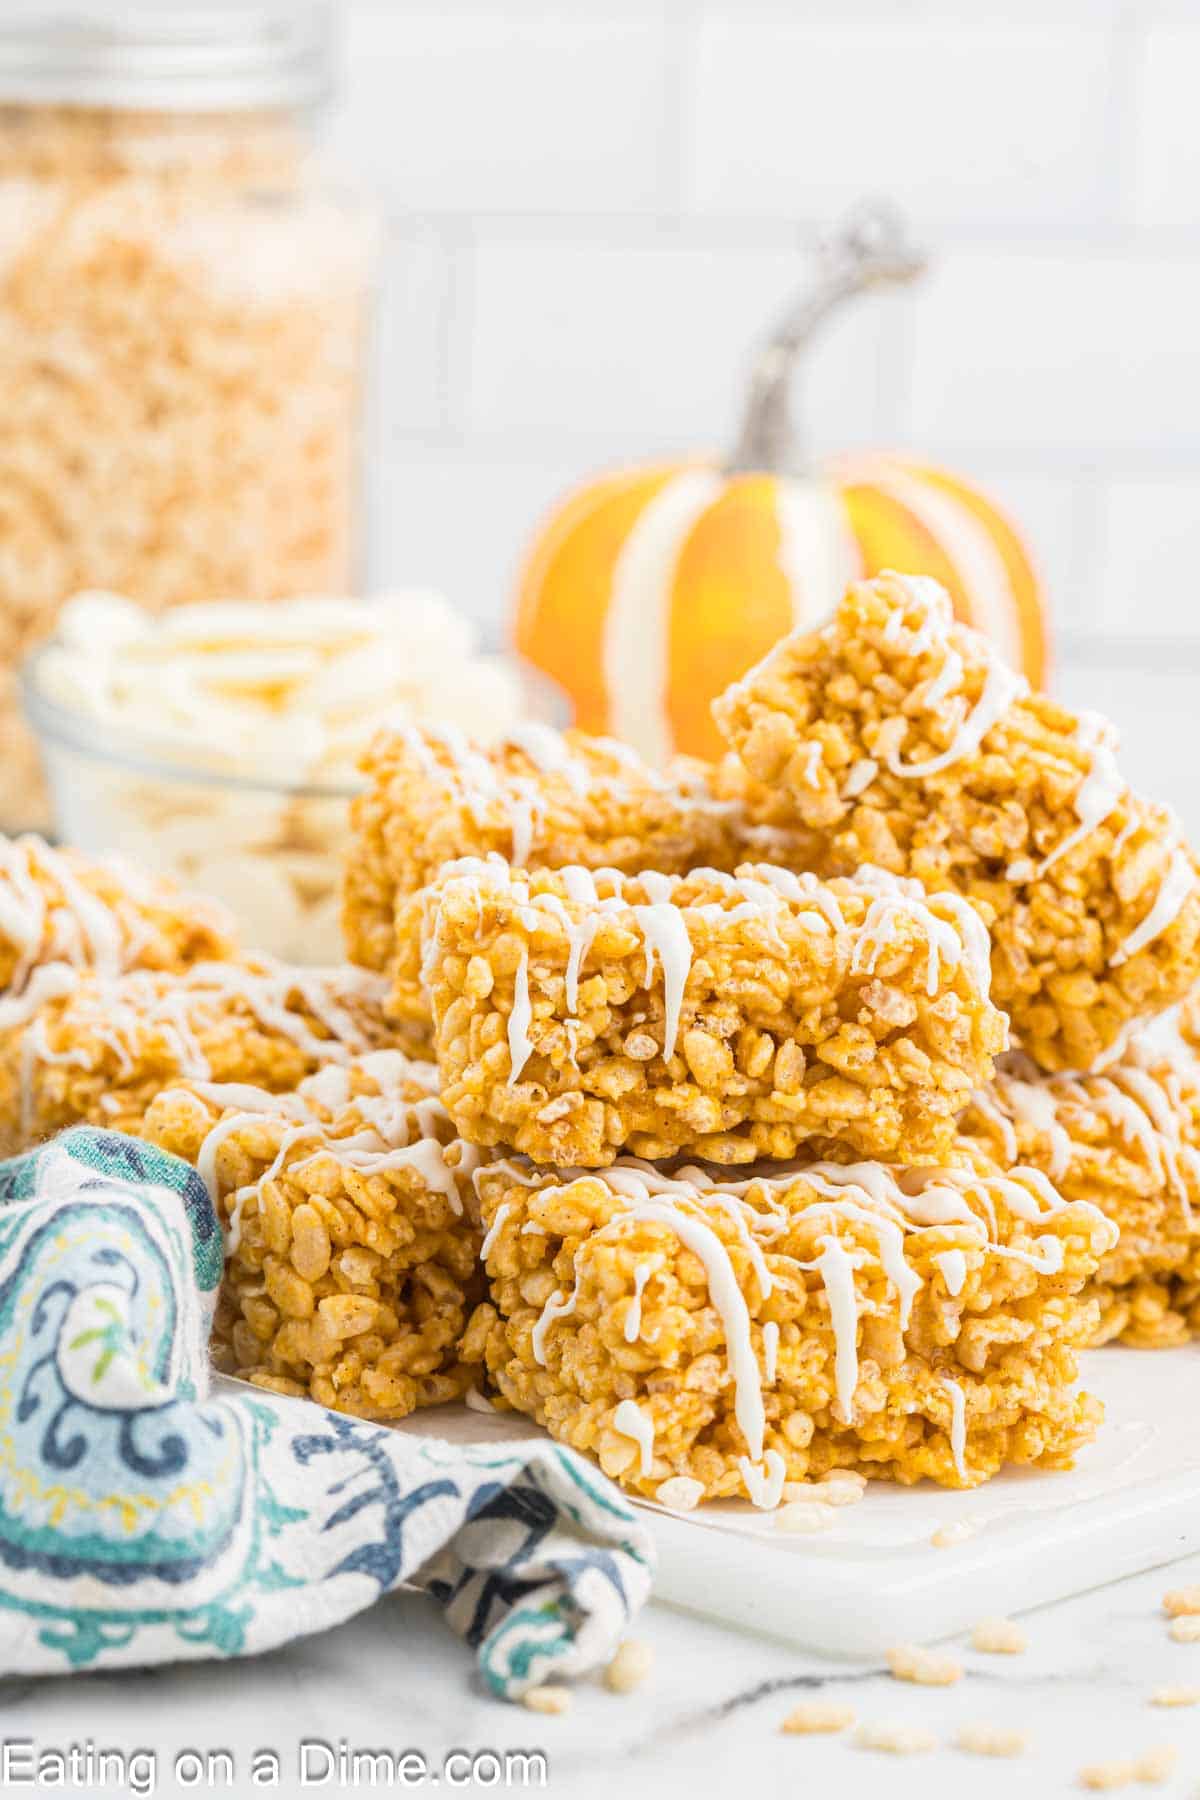 A stack of pumpkin rice krispie treats drizzled with white icing sits on a white table. A glass jar of rice cereal and a small pumpkin are decoratively placed in the background. A colorful cloth napkin lies next to the treats. A branding watermark reads "Eating on a Dime.com.